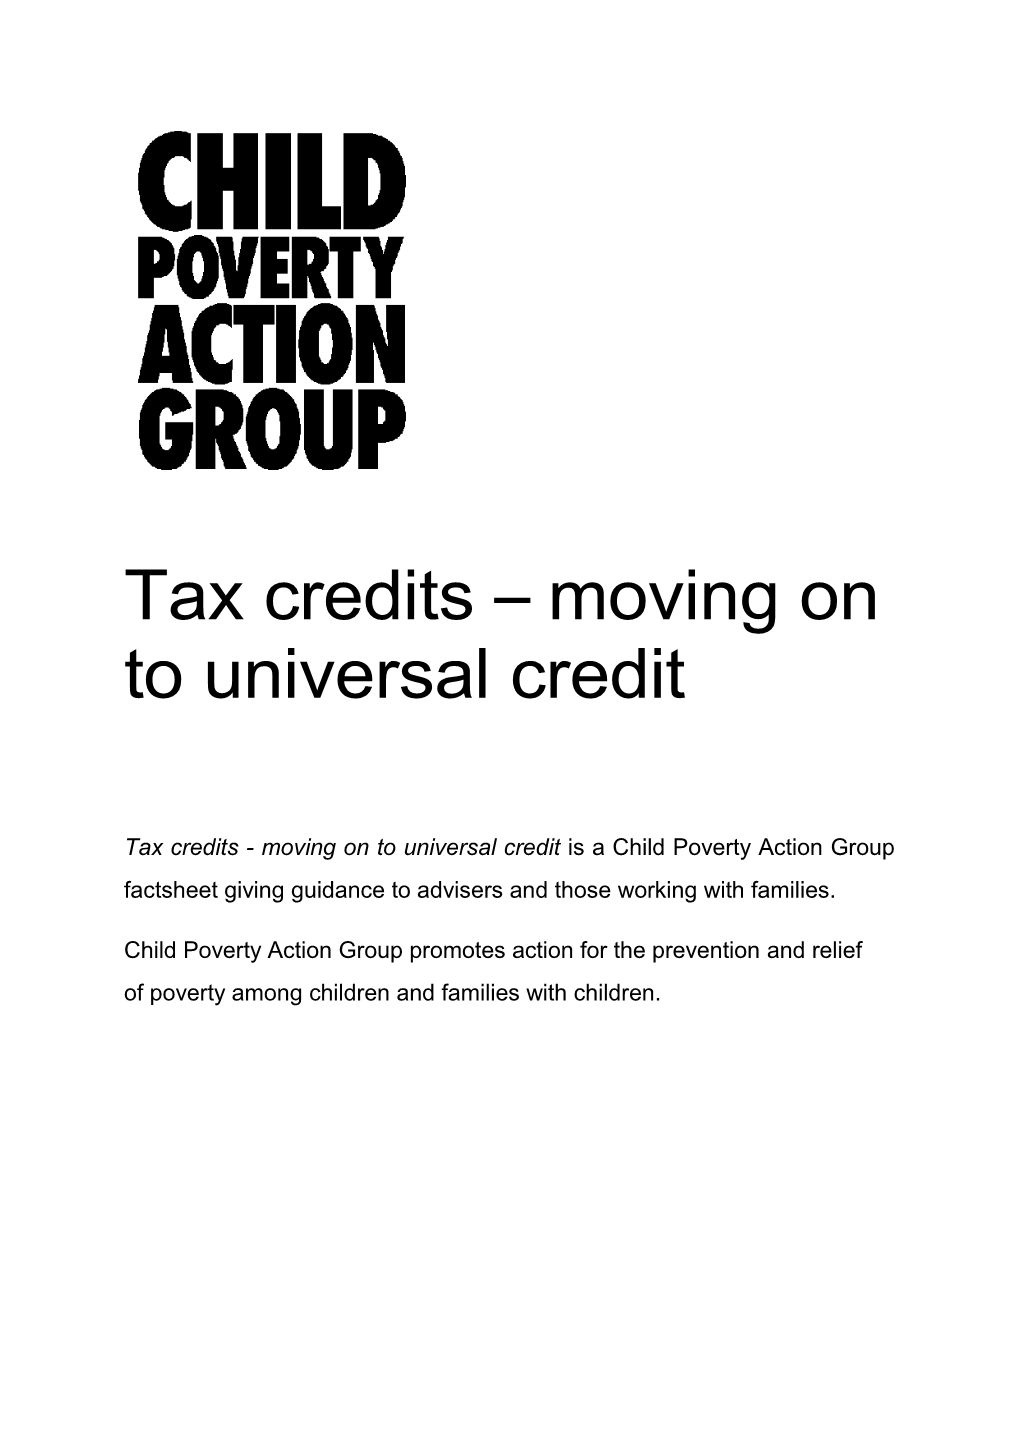 Tax Credits – Moving on to Universal Credit